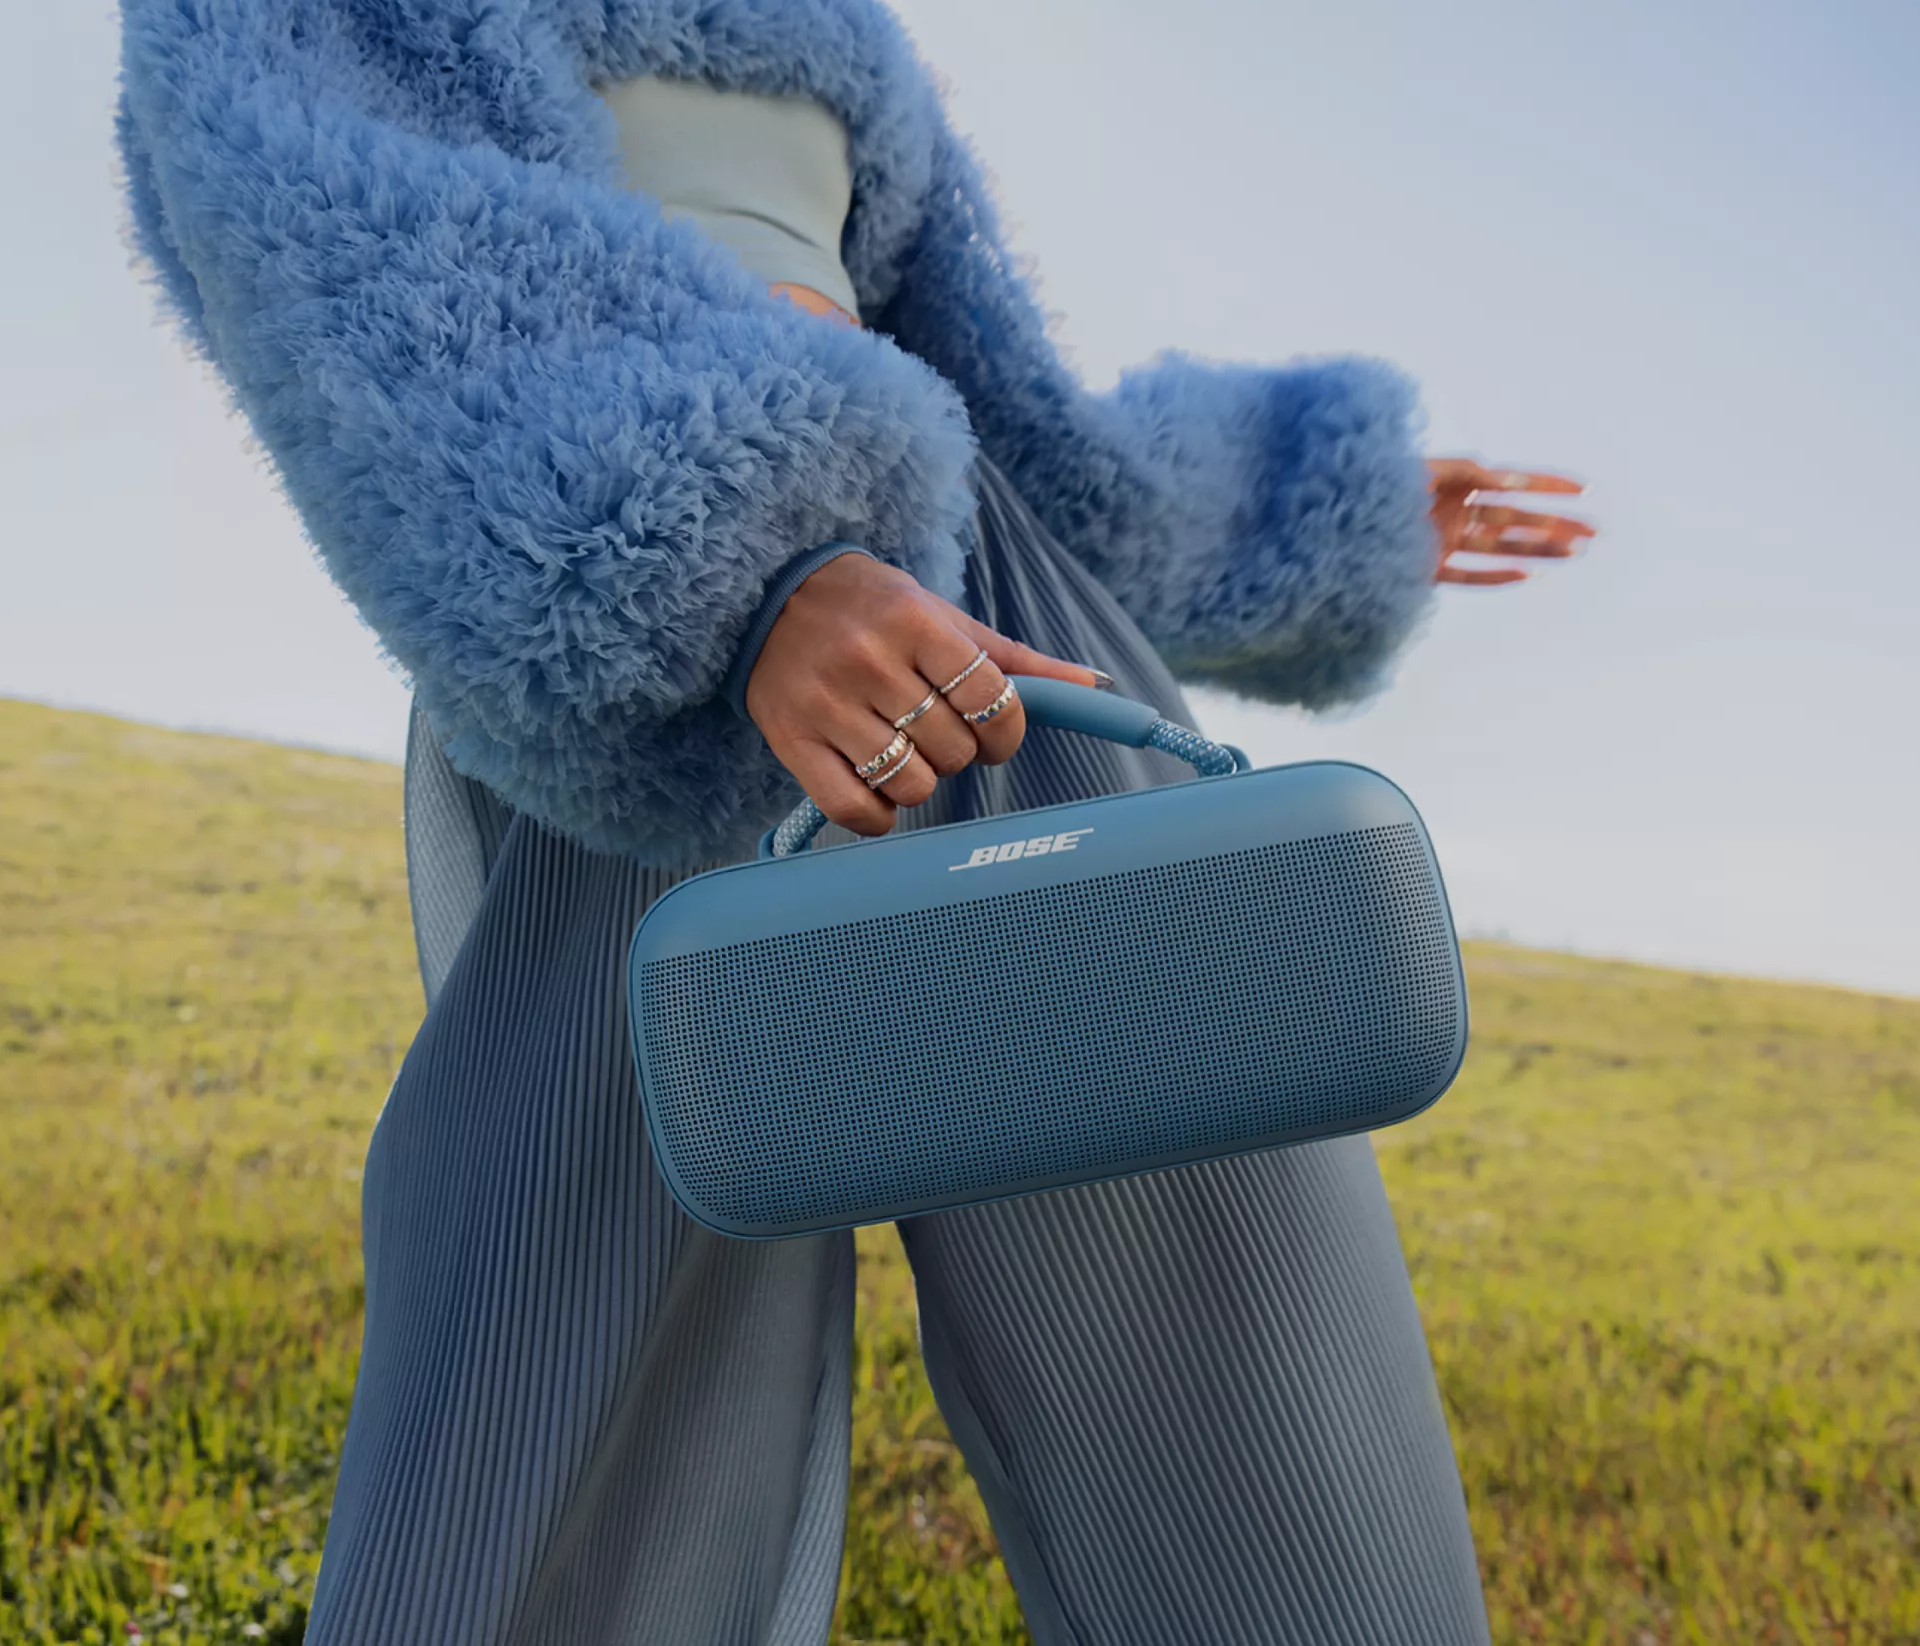 Woman carrying a Bose SoundLink Max Portable Speaker with the carry handle outside